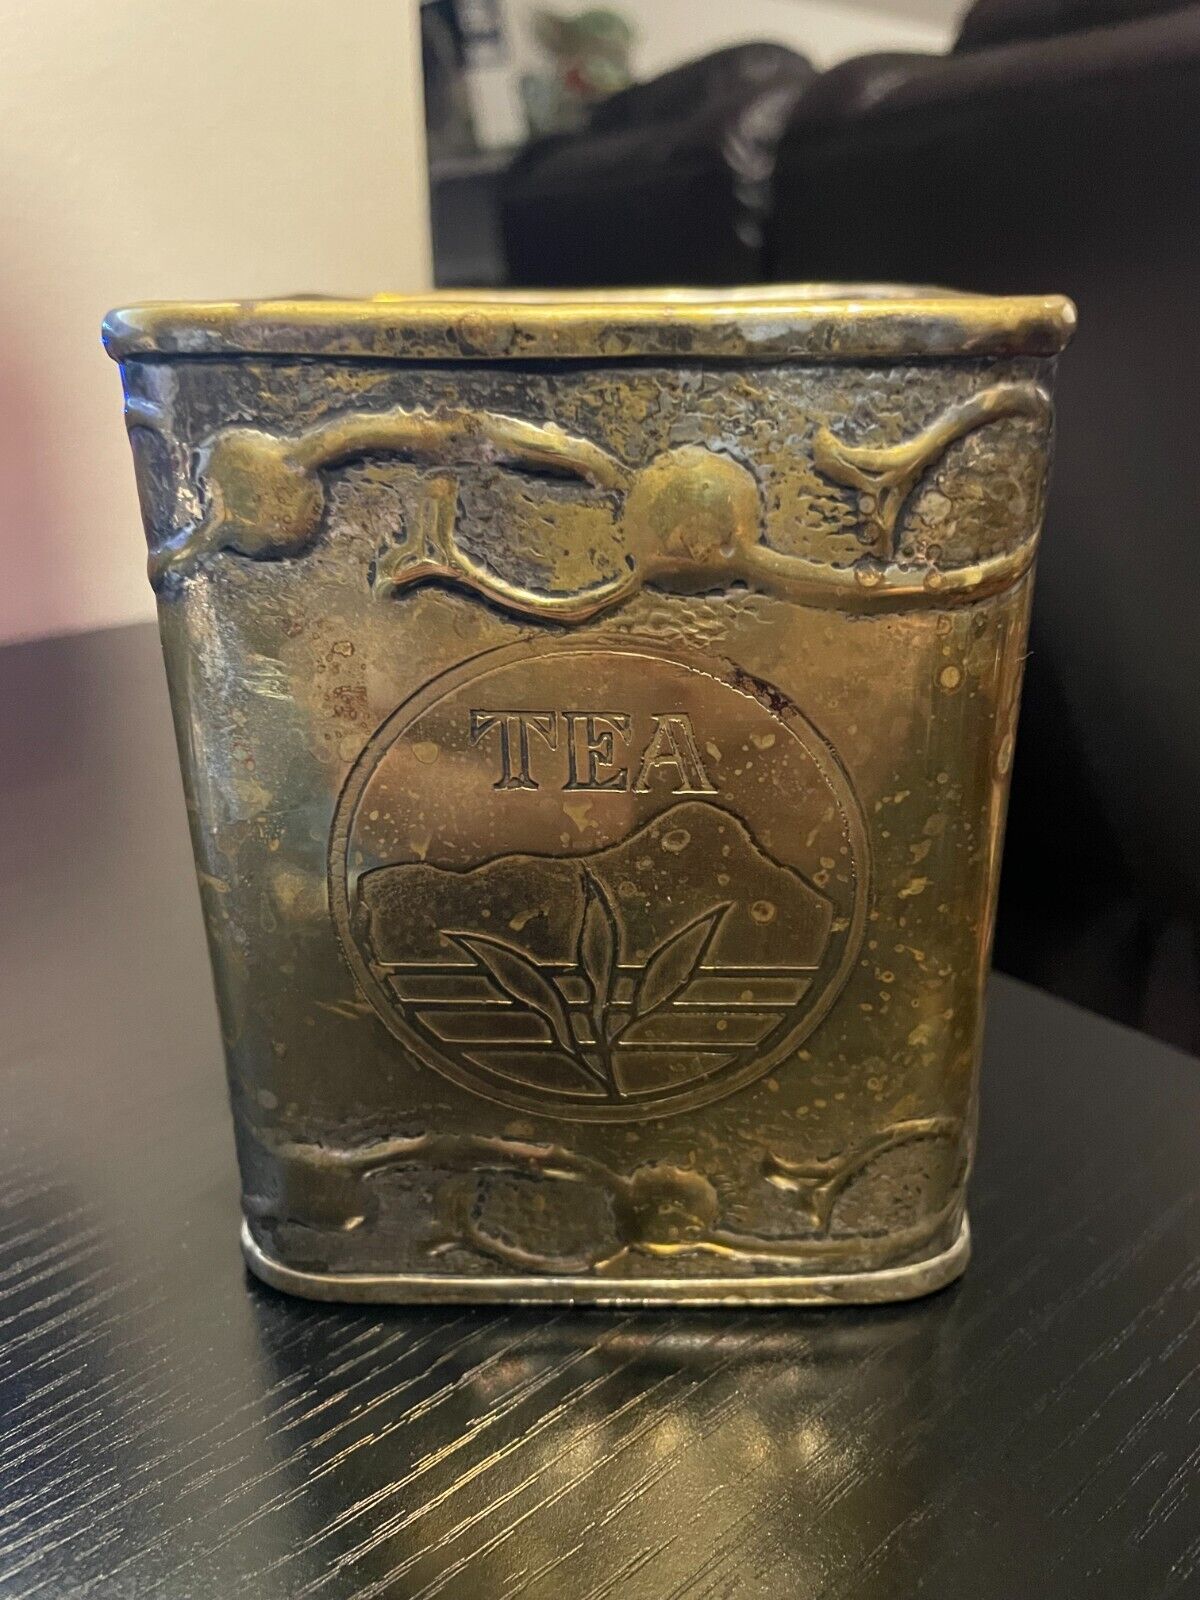 Very Rare Vintage Solid brass square tea container with lid (17-1800?)